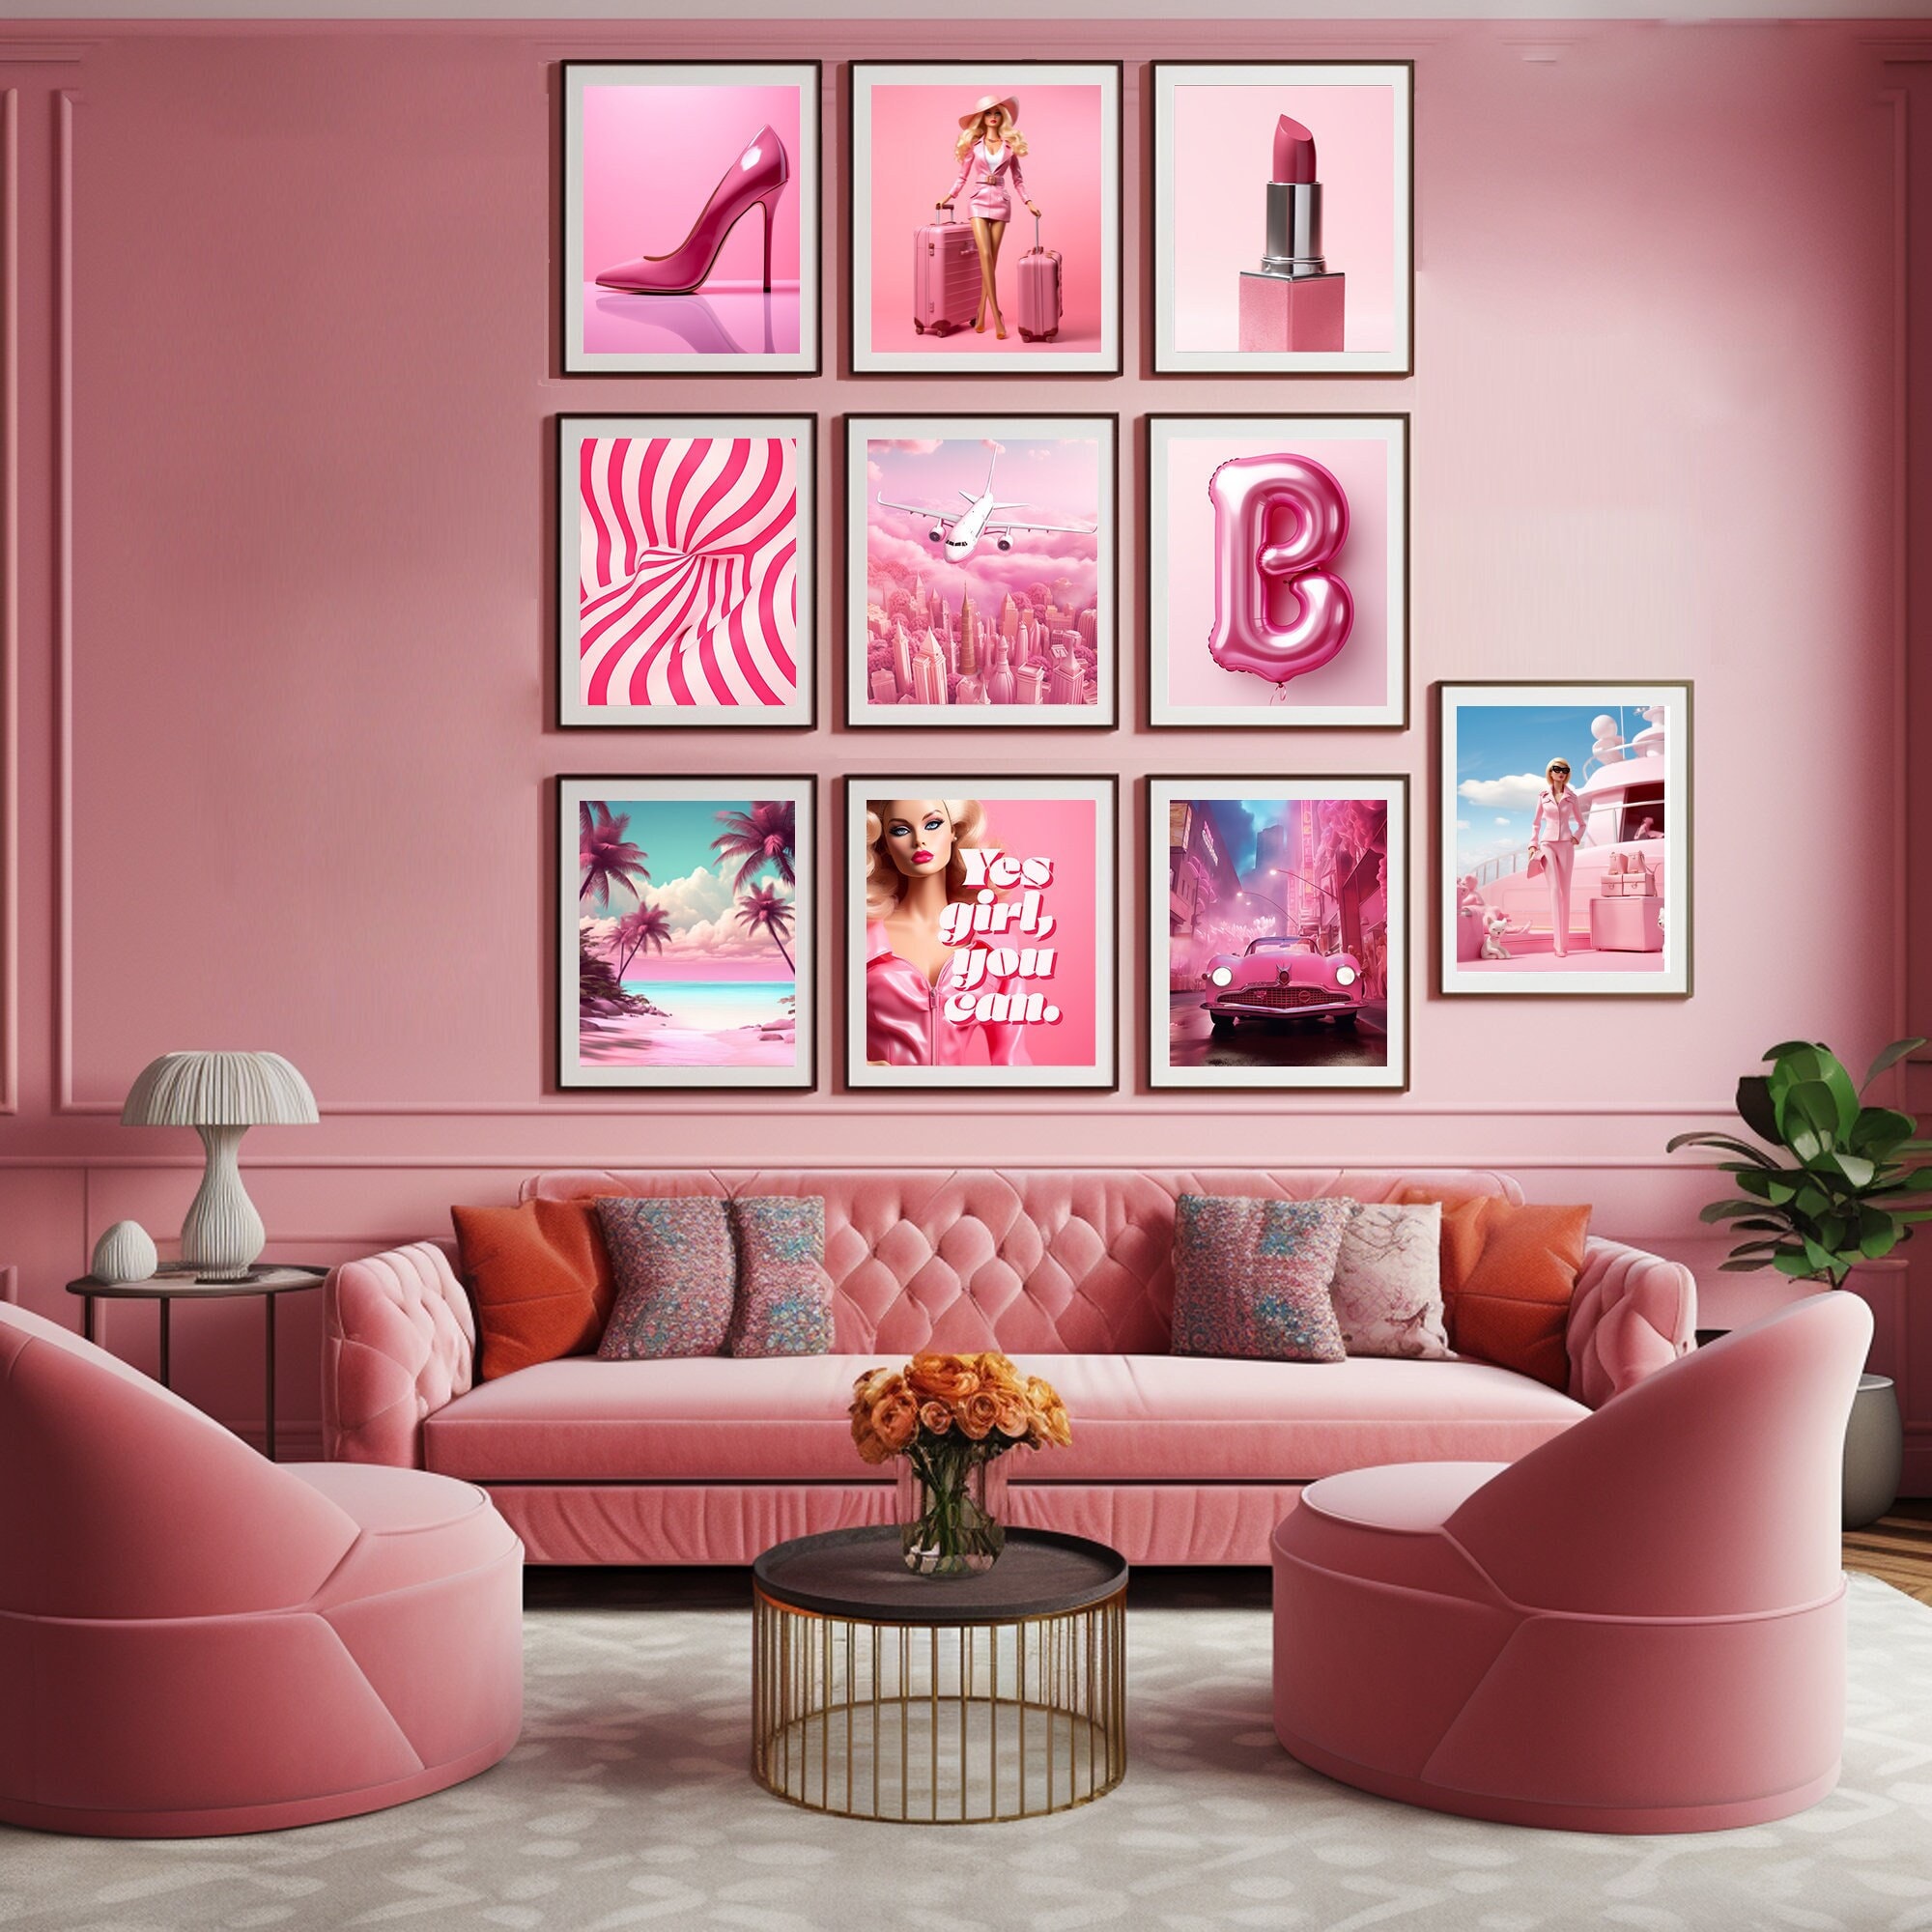 deco #chambre #bedroom #barbie #rose #pink #fille #girl #maison #hous